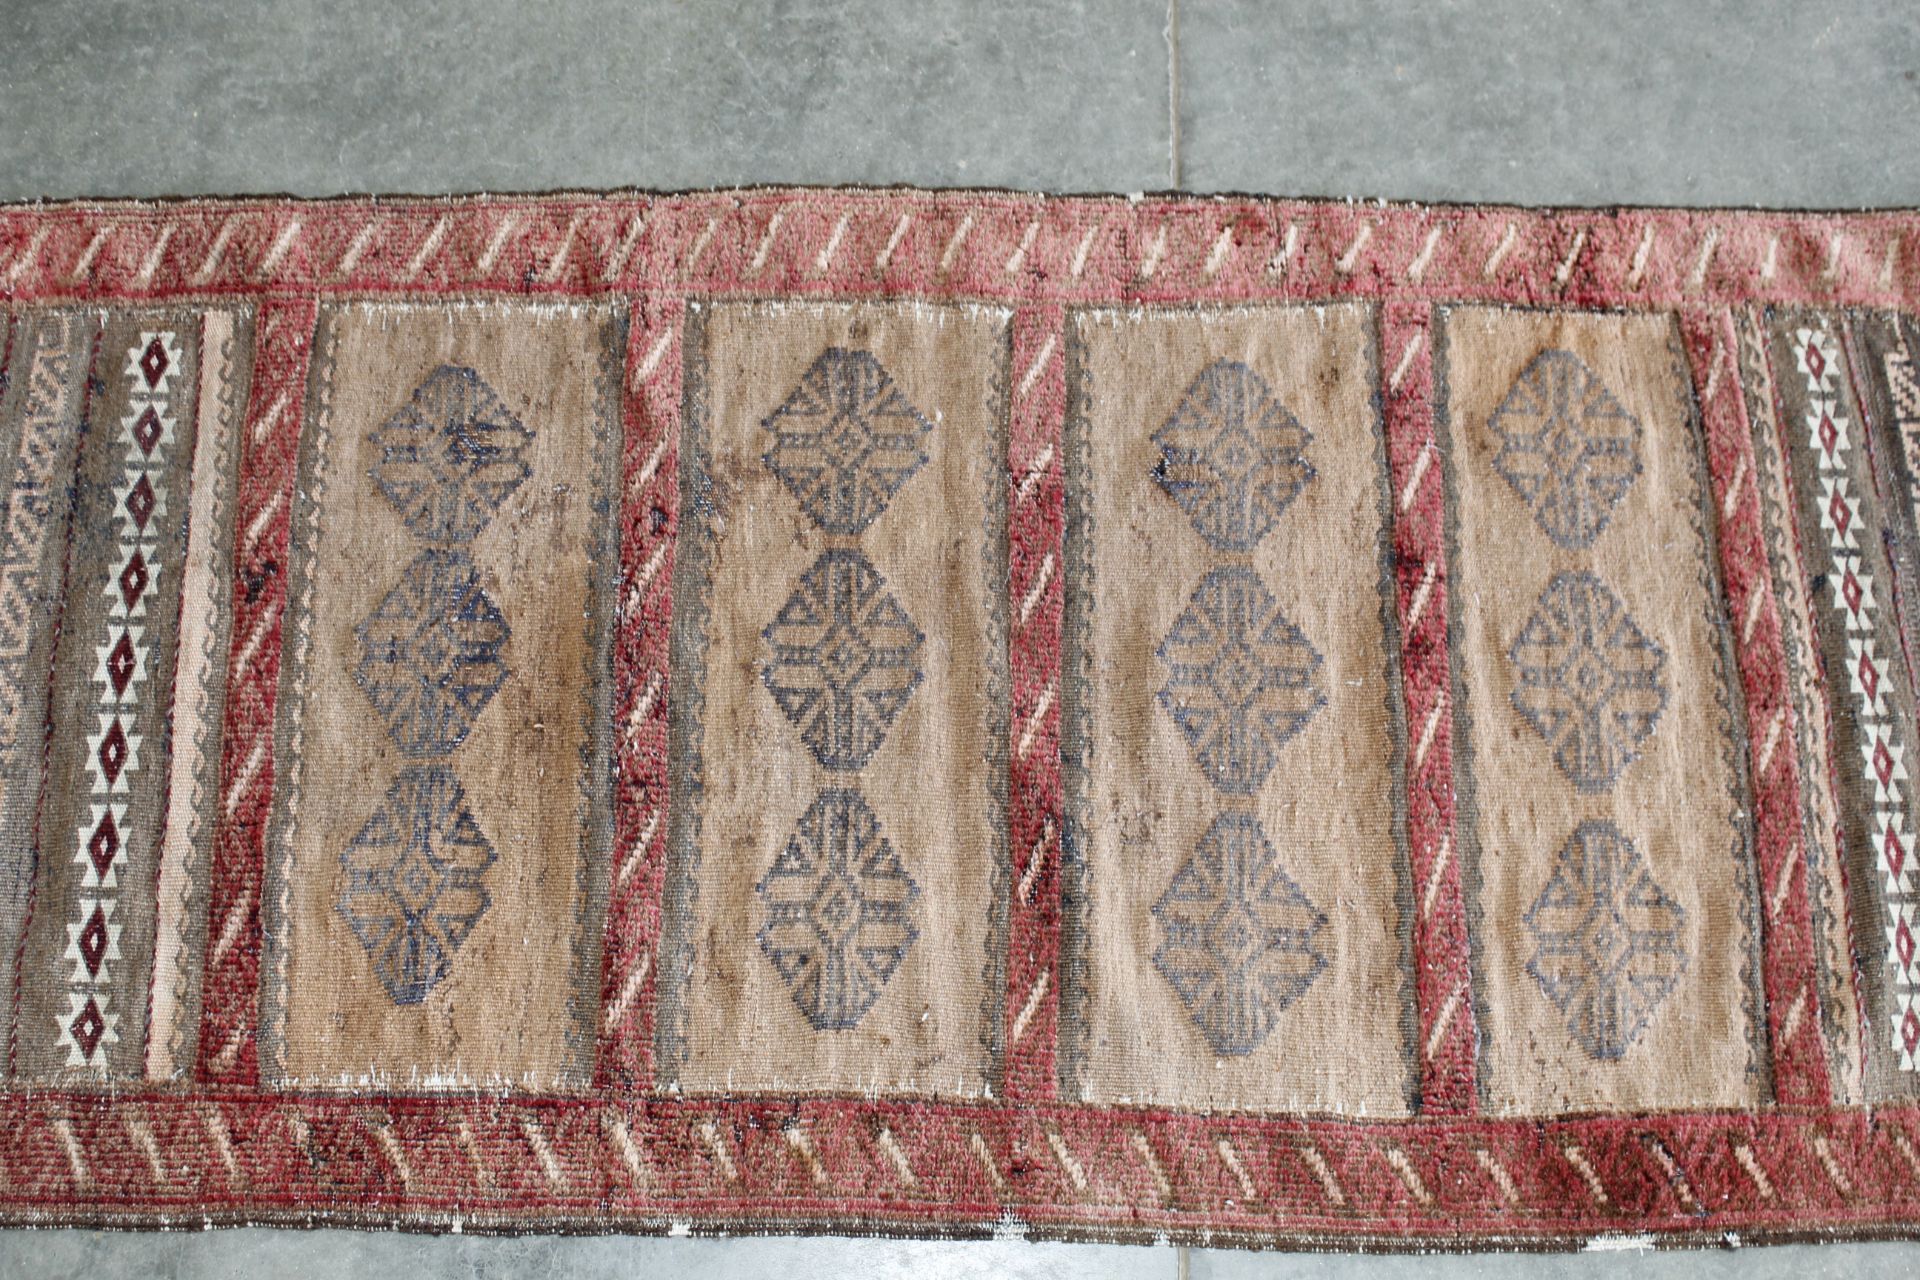 An approx. 5'1" x 2'2" Eastern red pattern rug - Image 2 of 5